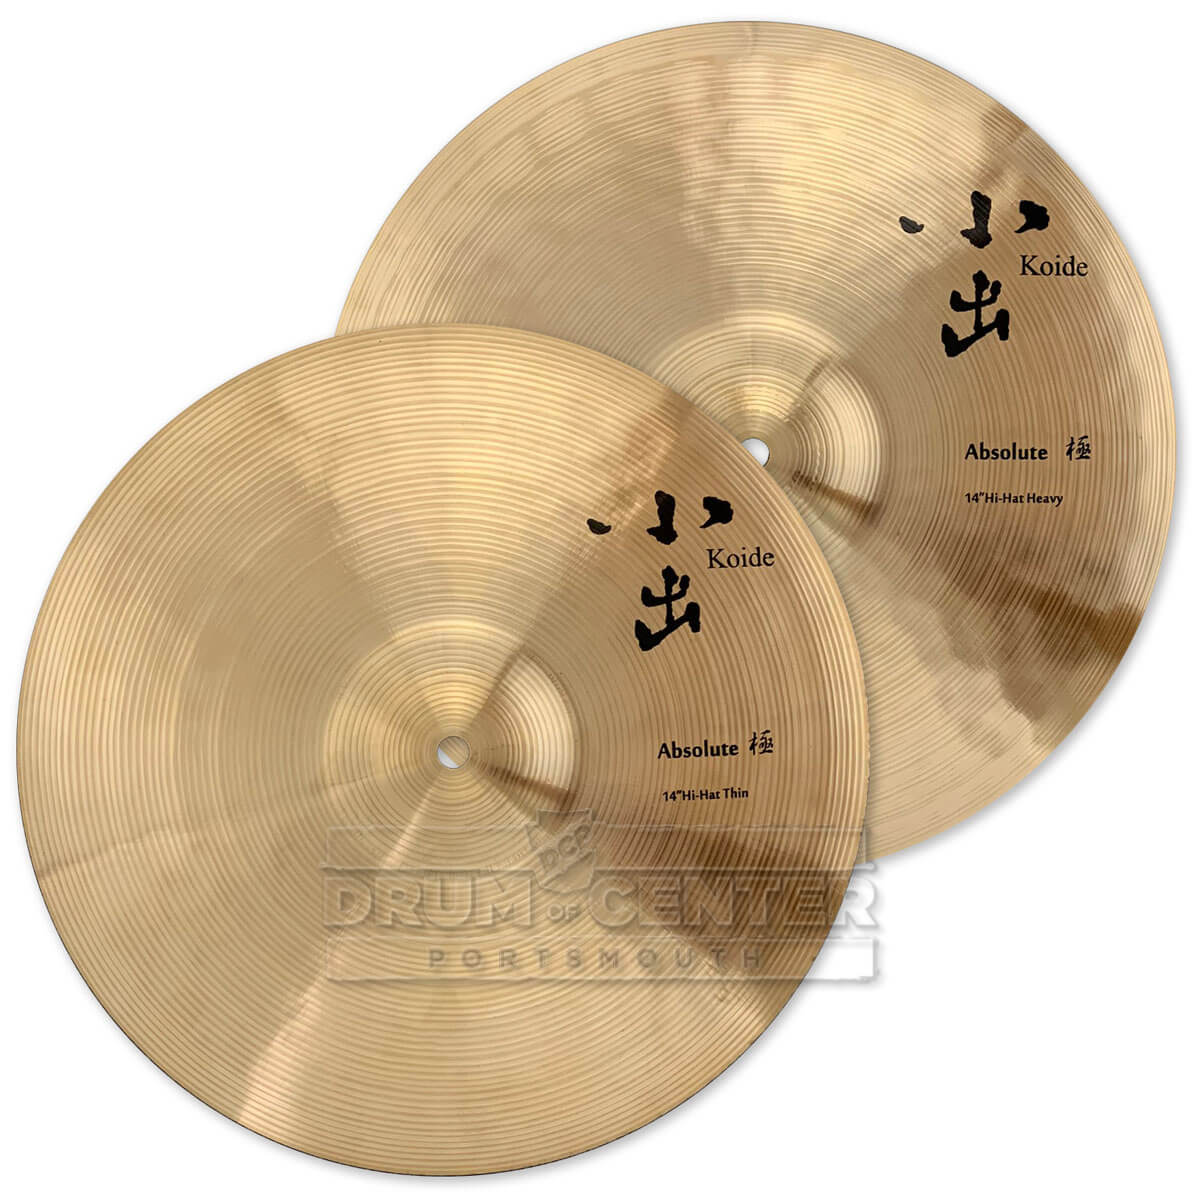 Koide Absolute Hi Hat Cymbals Thin/Heavy 14" 1 grams - Drum Center Of Portsmouth